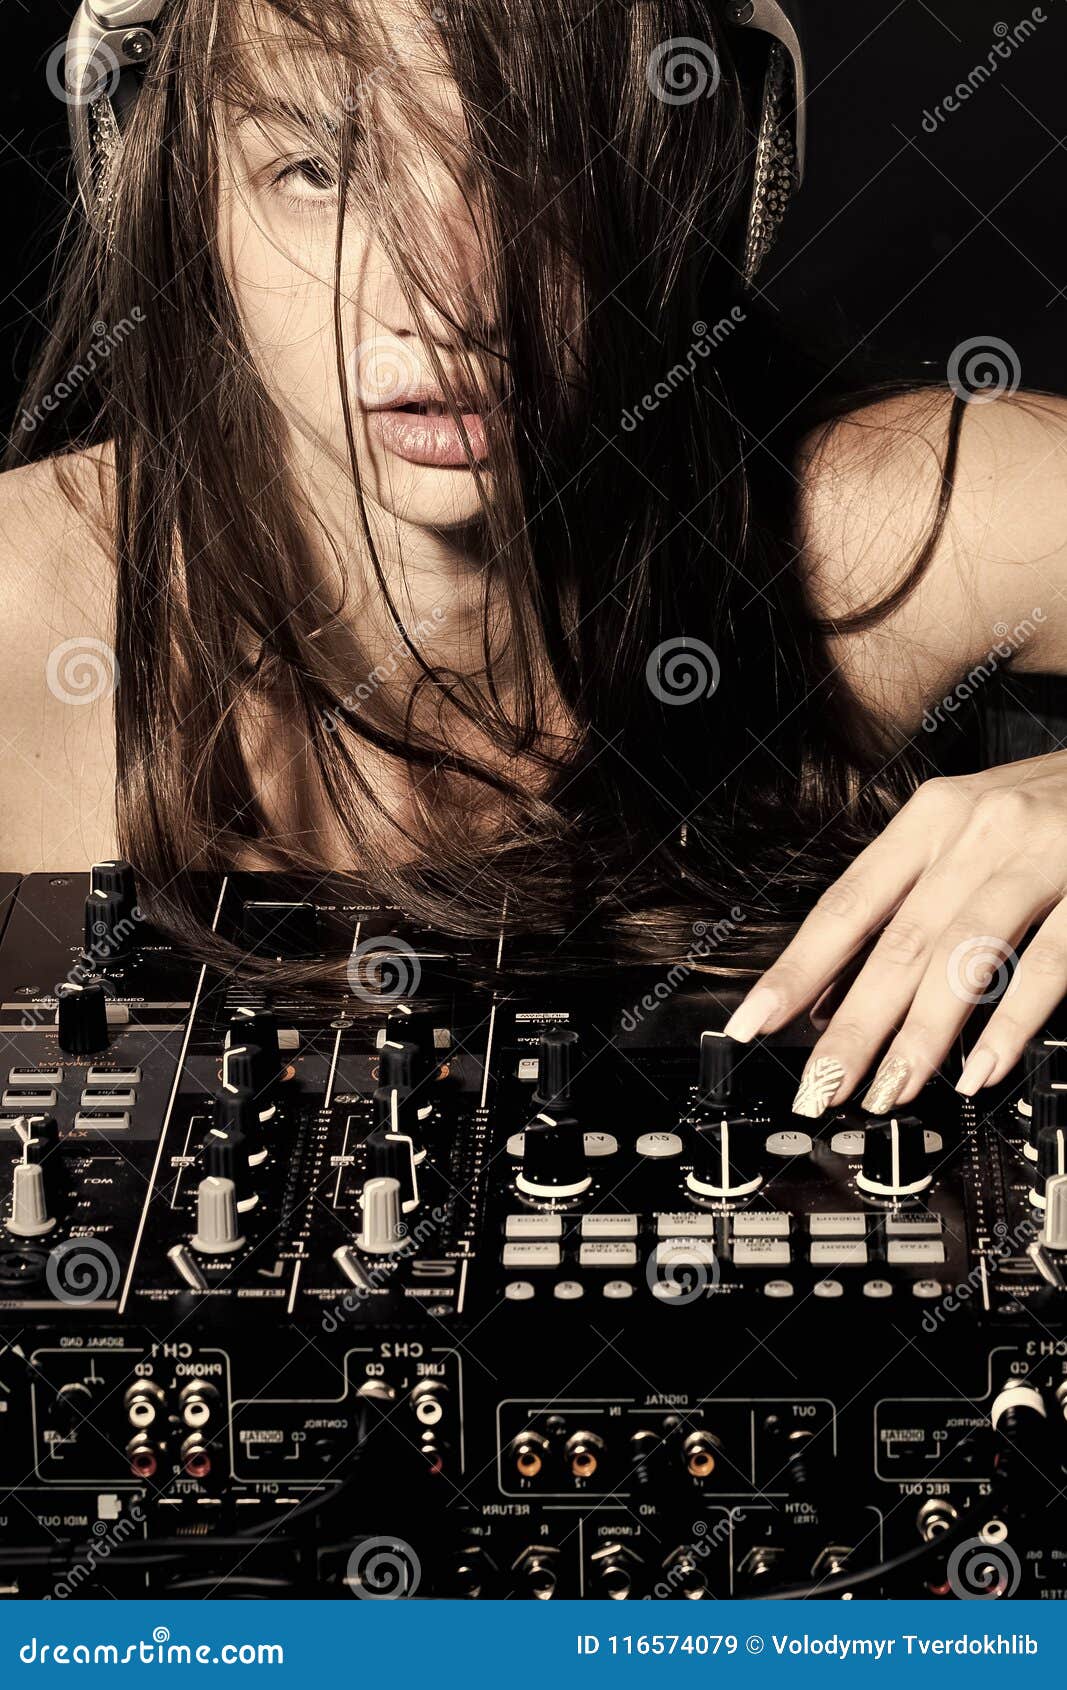 naked girl with dj equipment